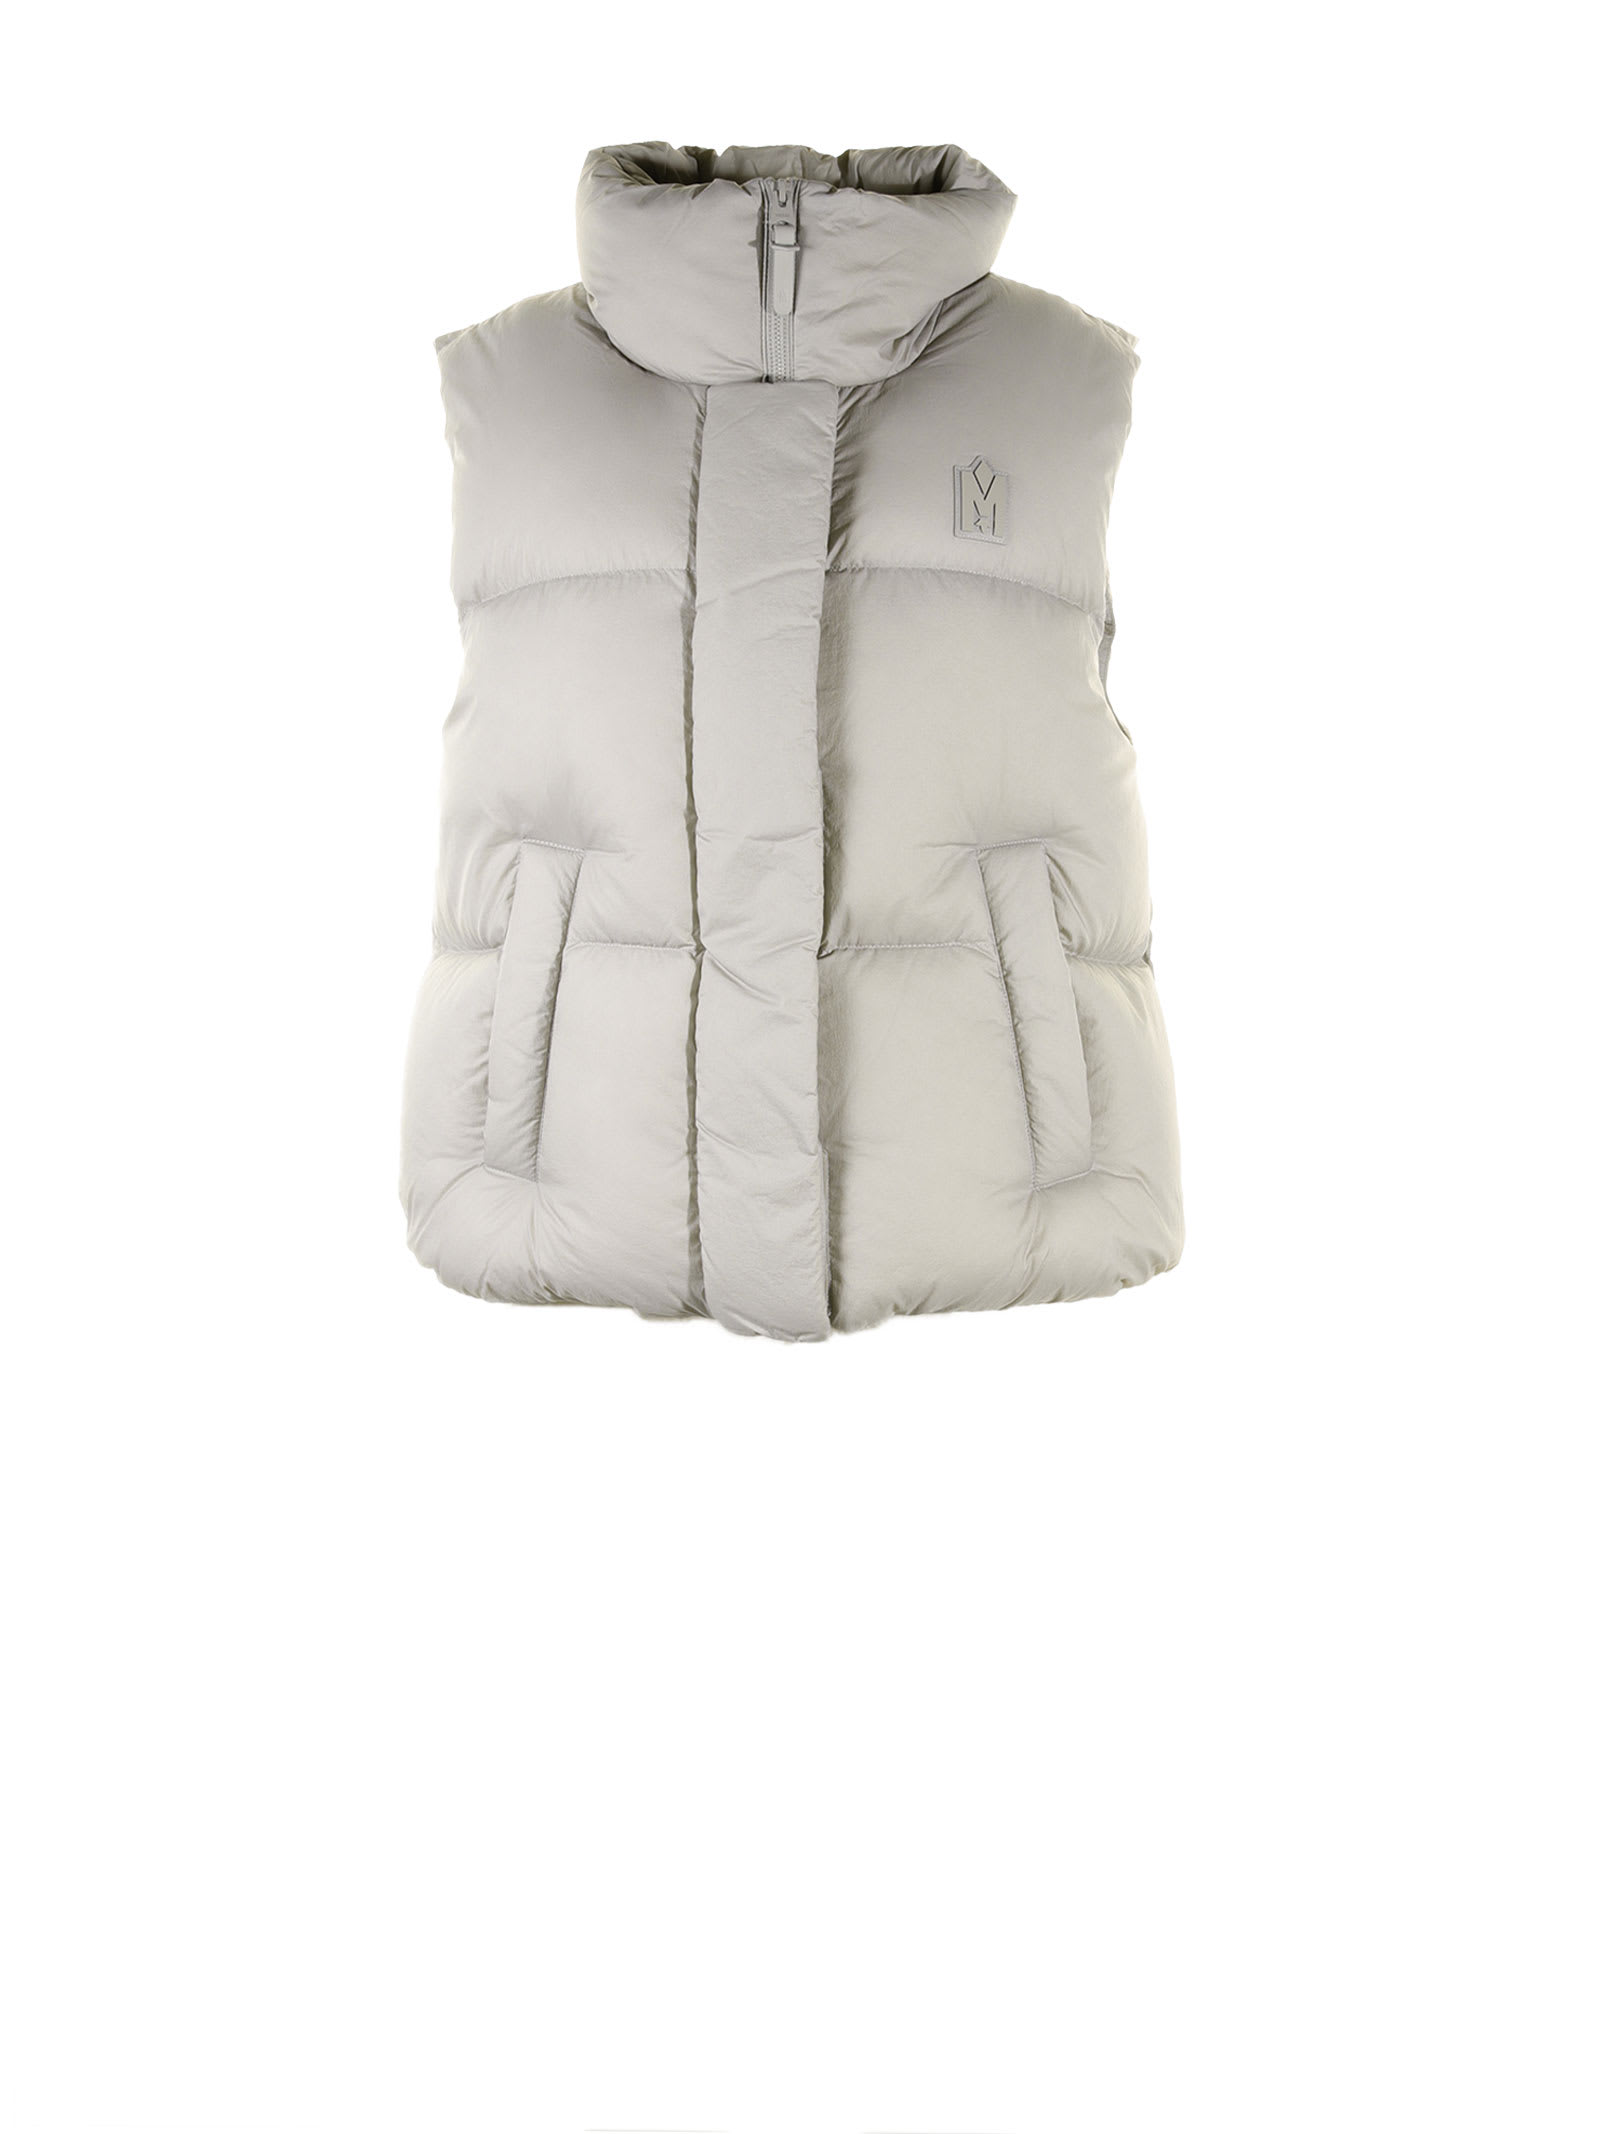 MACKAGE GRAY QUILTED NAKI VEST